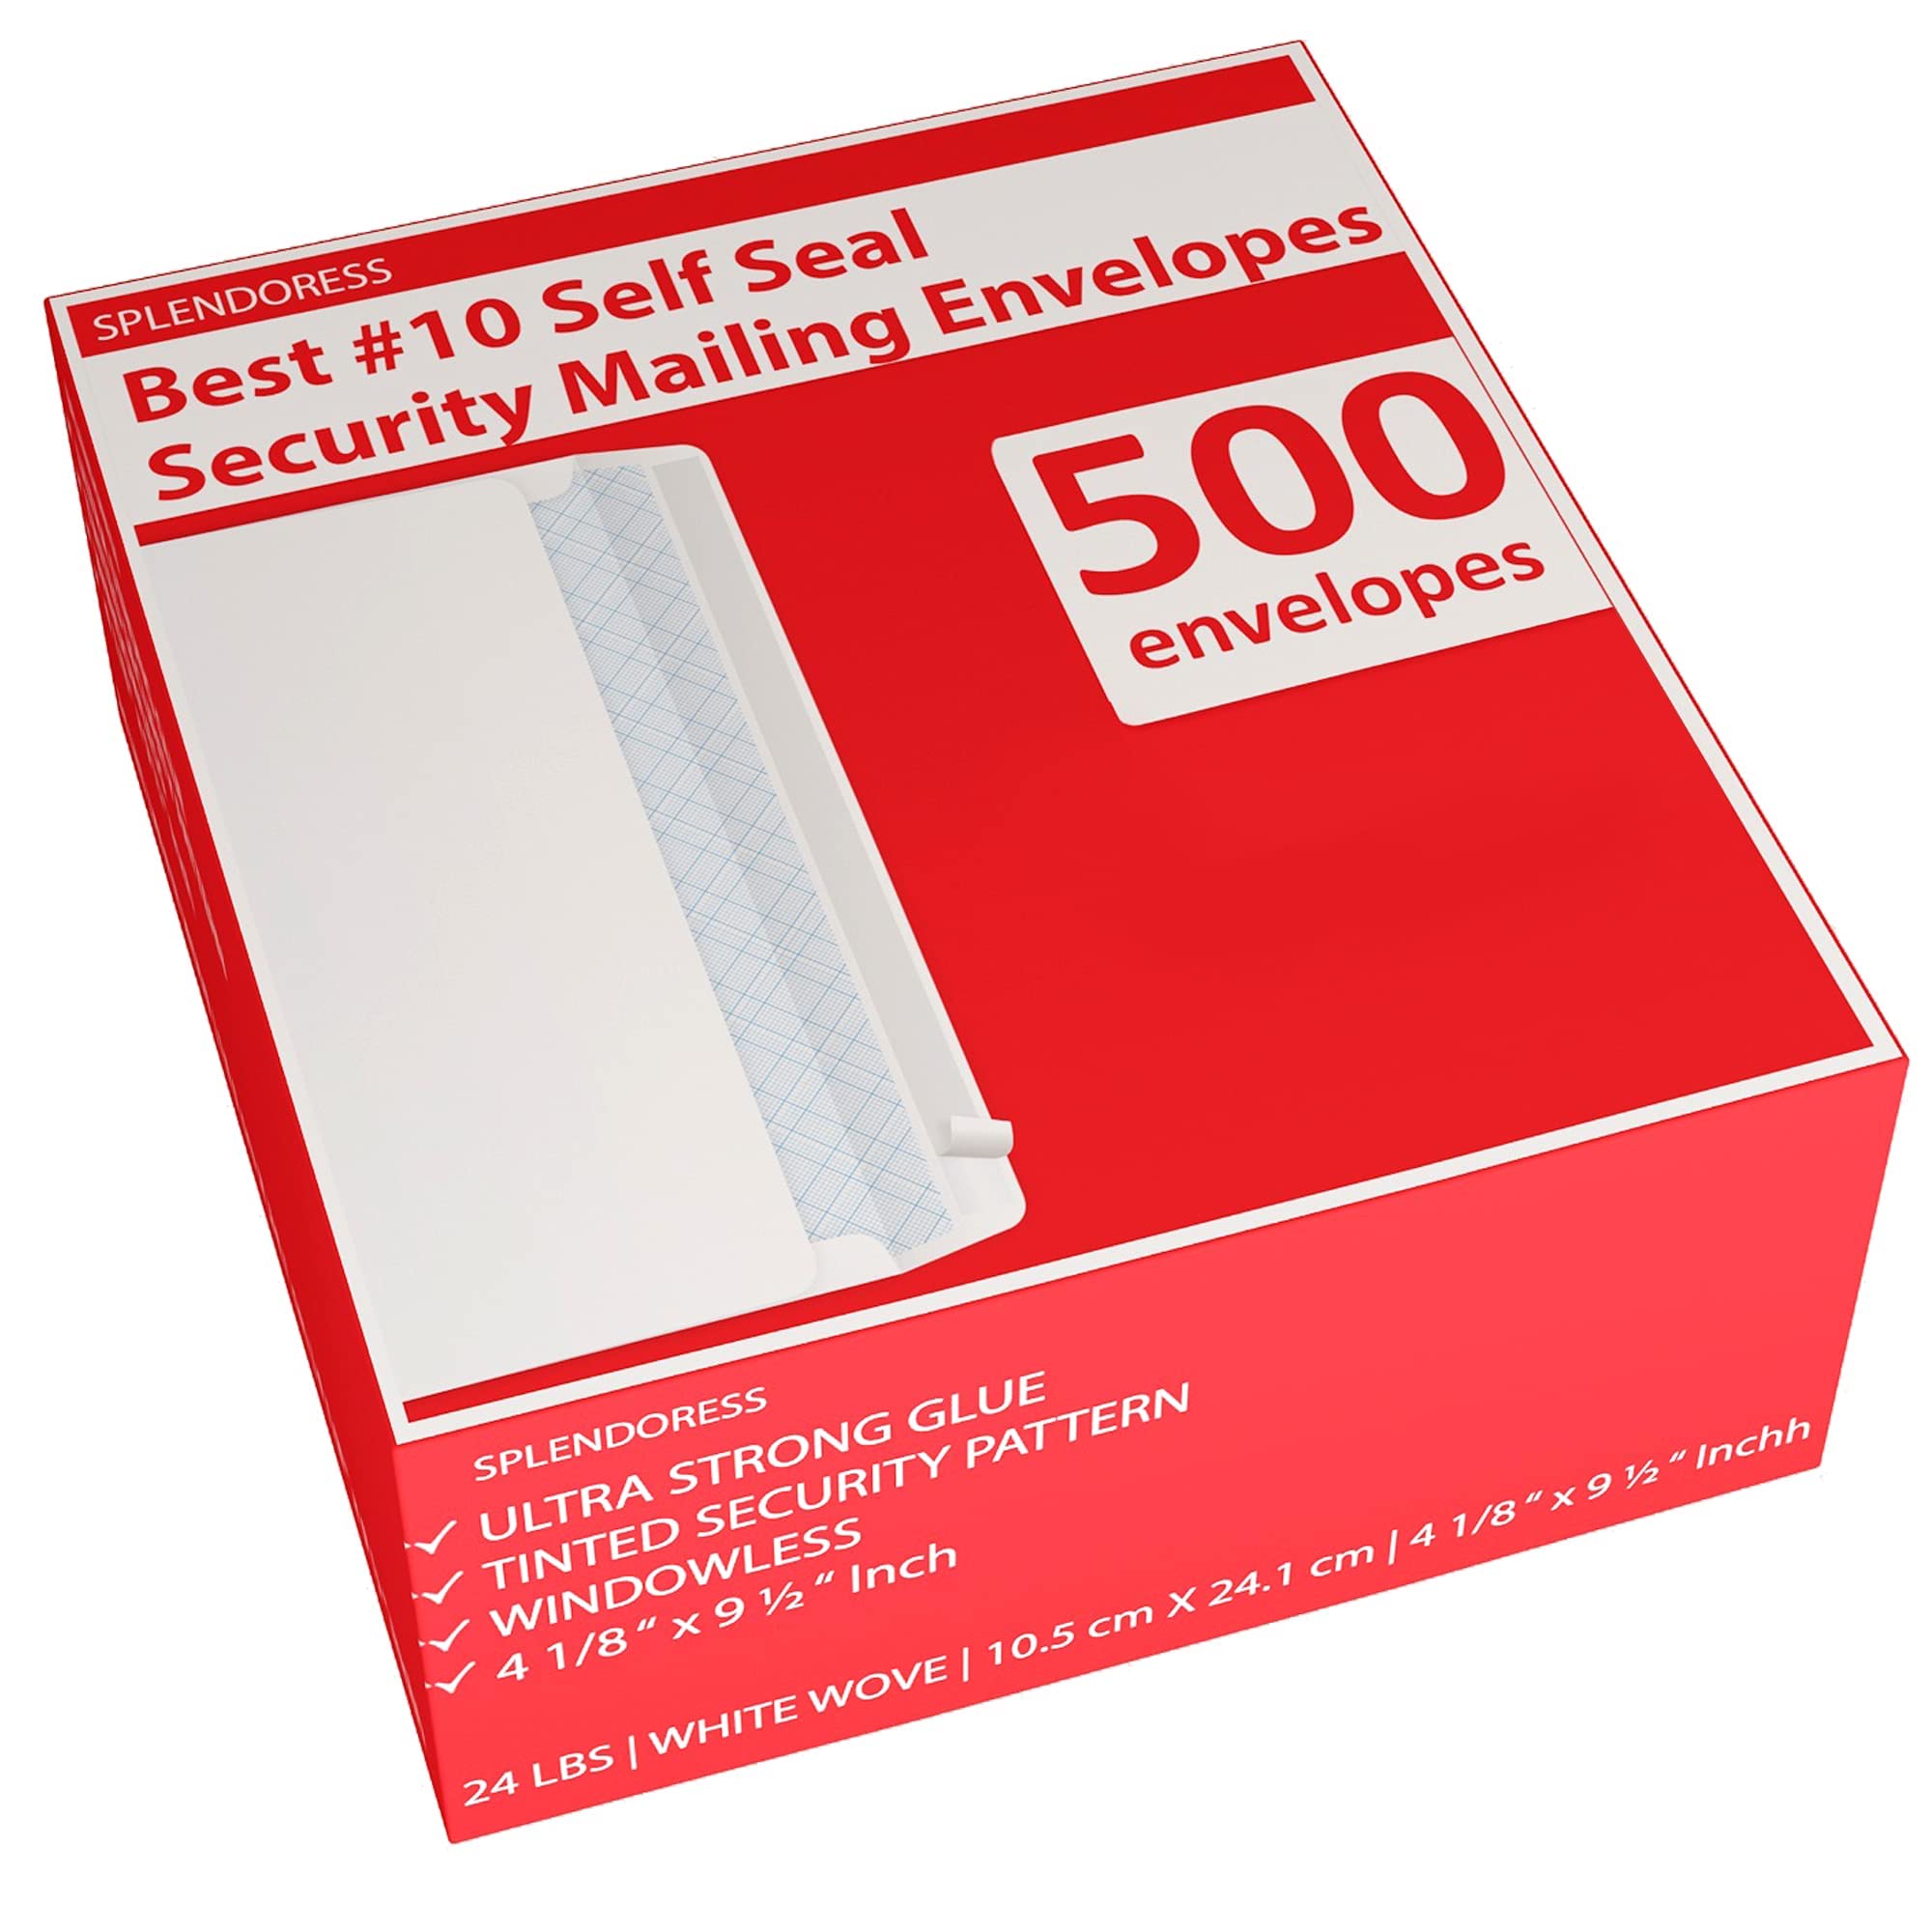 Book Cover #10 Envelopes Letter Size Self Seal, Business White Security Tinted Peel and Seal, 500 Pack Windowless, Legal Size Regular Plain Envelopes 4-1/8 x 9-1/2 Inches - 24 LB Envelops 500 Count